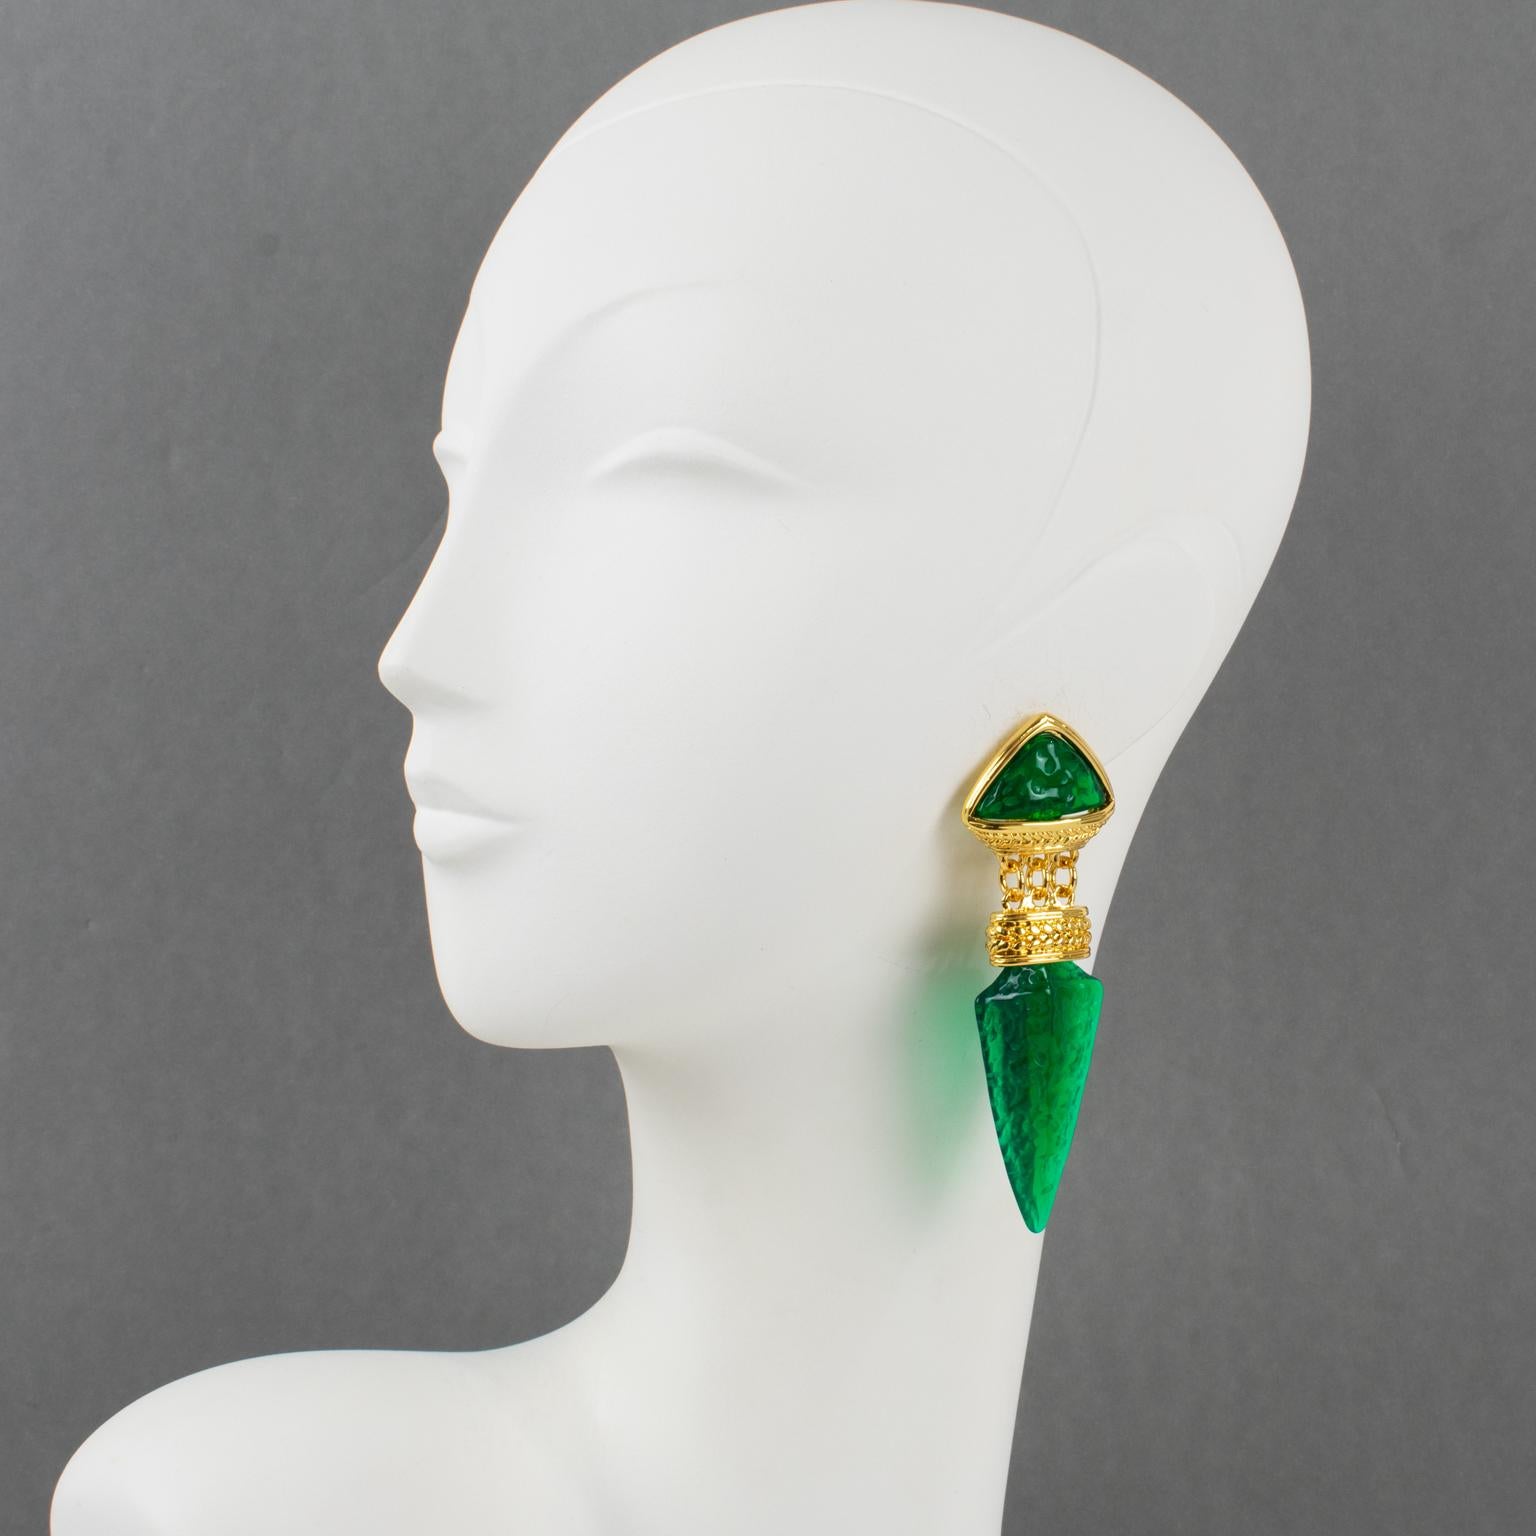 These elegant Guy Laroche Paris clip-on earrings feature a dangling shape with carved and textured gilt metal framing, ornate with emerald green resin carved cabochons and sword-tip-shaped beads. The engraved signature is at the back and reads Guy